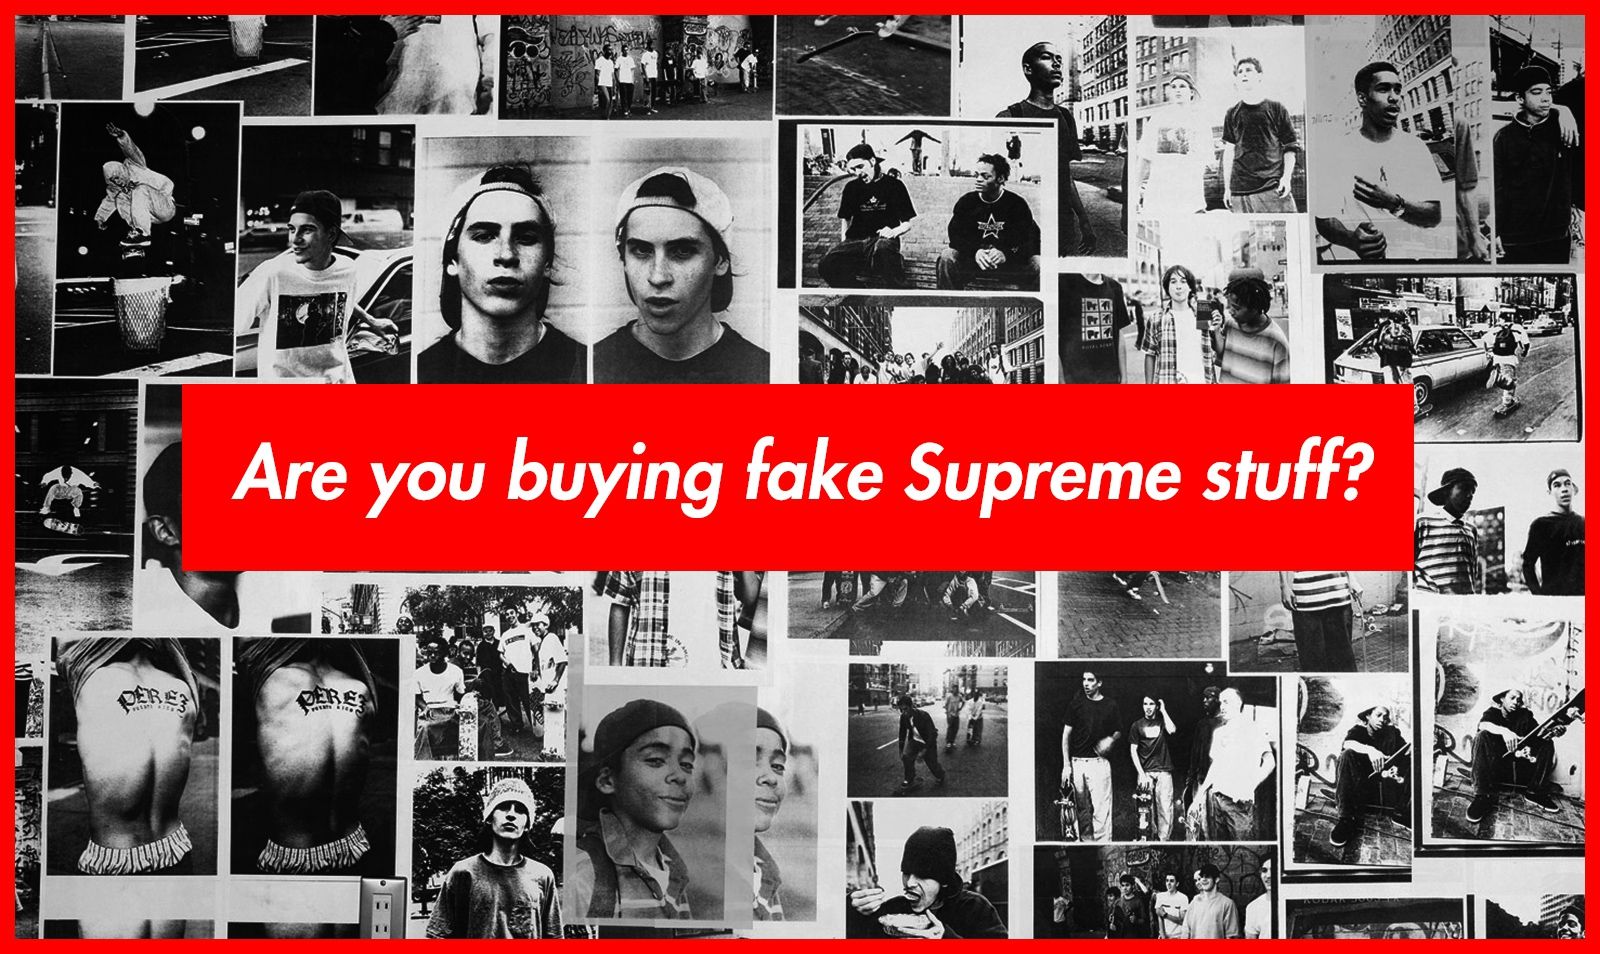 Owner Of Fake Supreme Brand, Supreme Italia Says He's Doing Nothing  Wrong